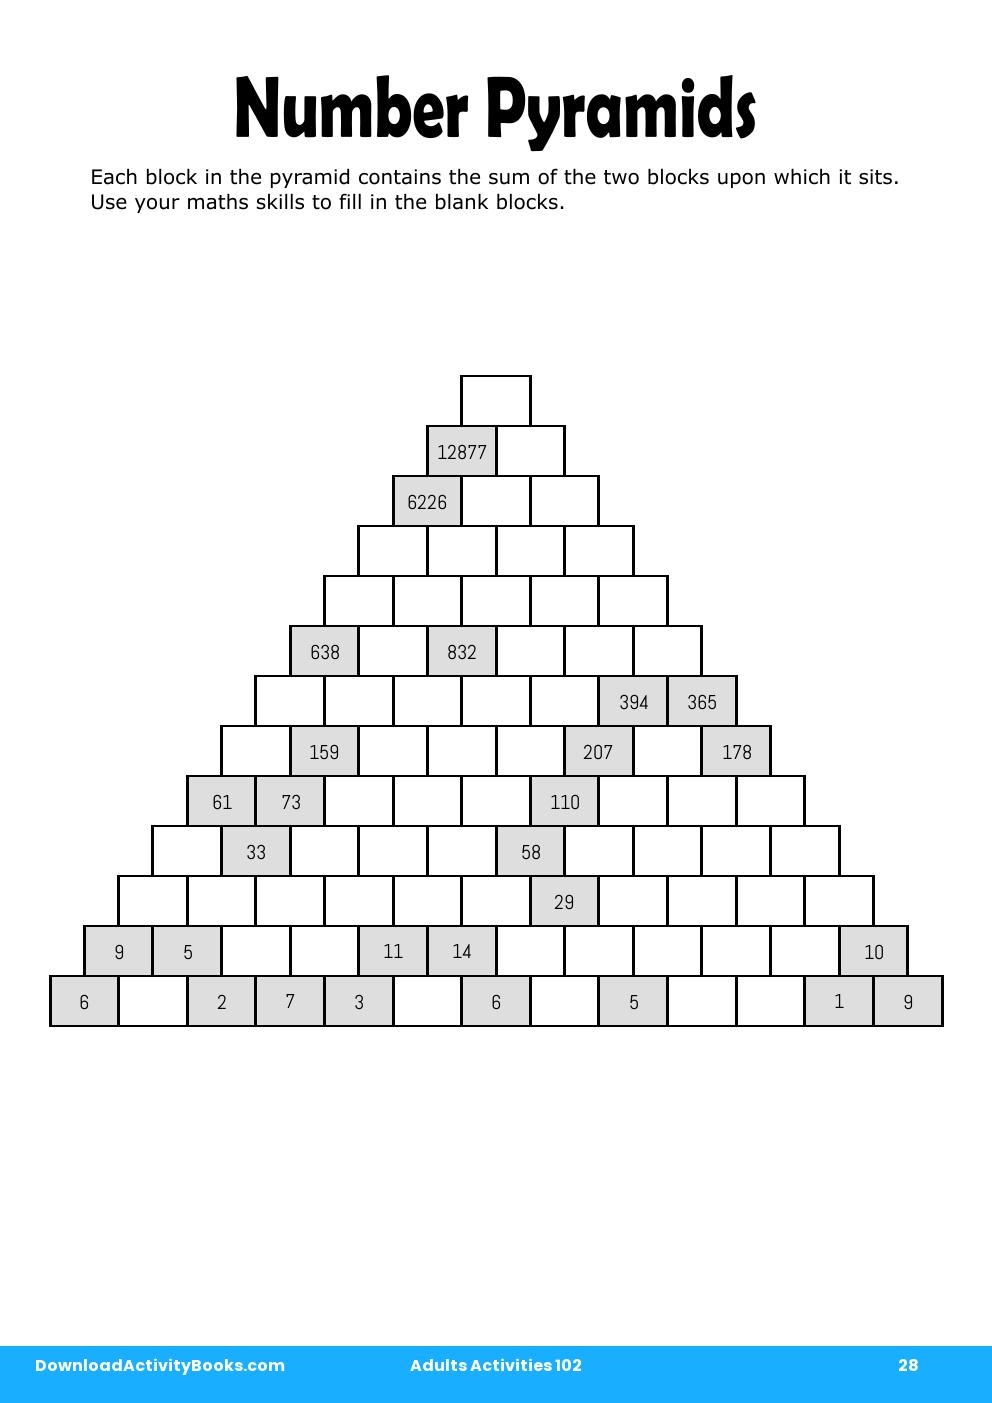 Number Pyramids in Adults Activities 102